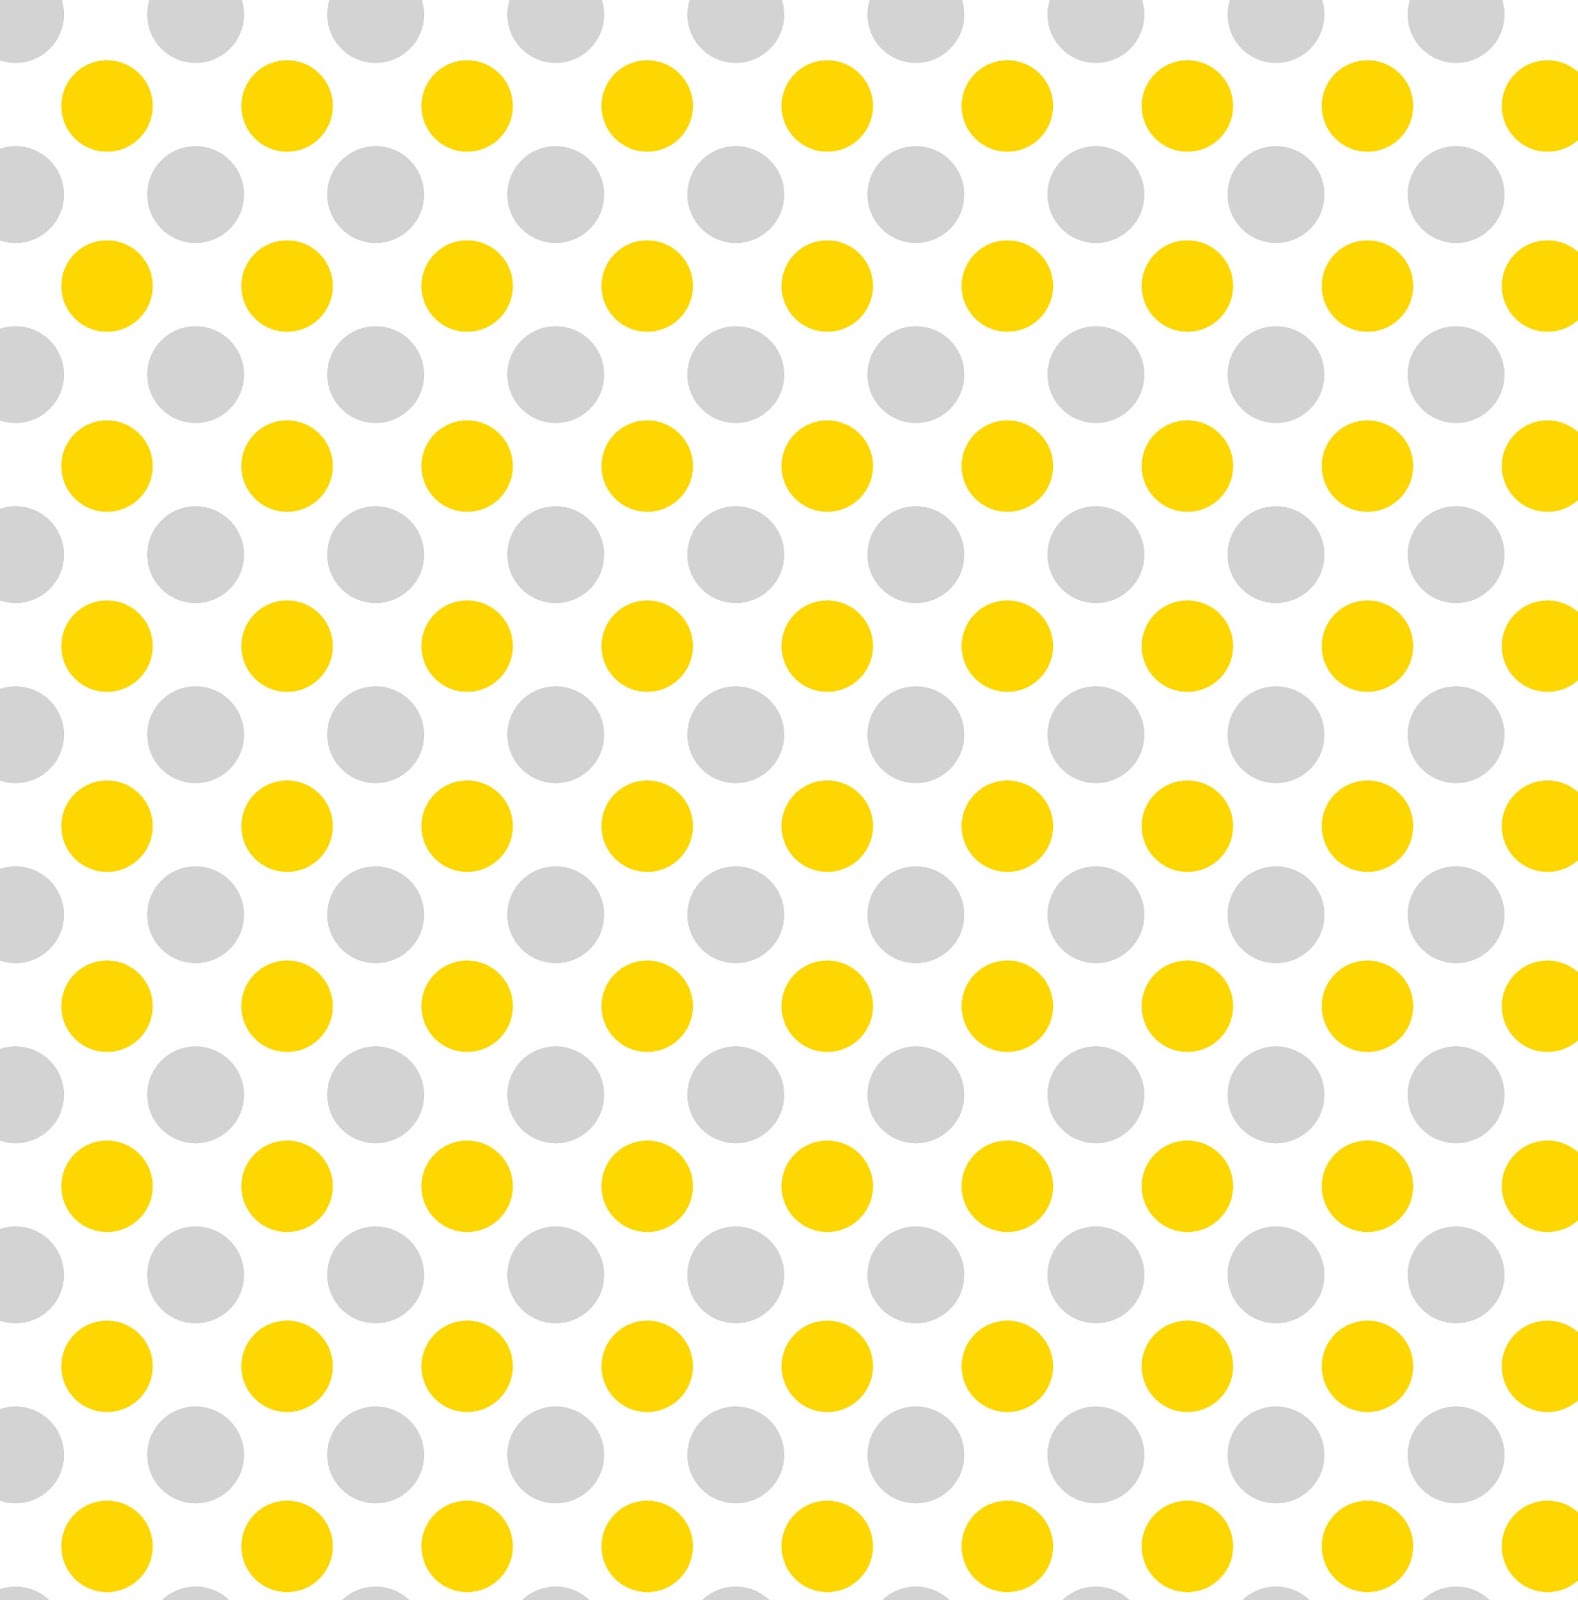 Free Seamless Polka Dots Svg In Gray And Gold Colors Combination - Polka Dot Background, Transparent background PNG HD thumbnail